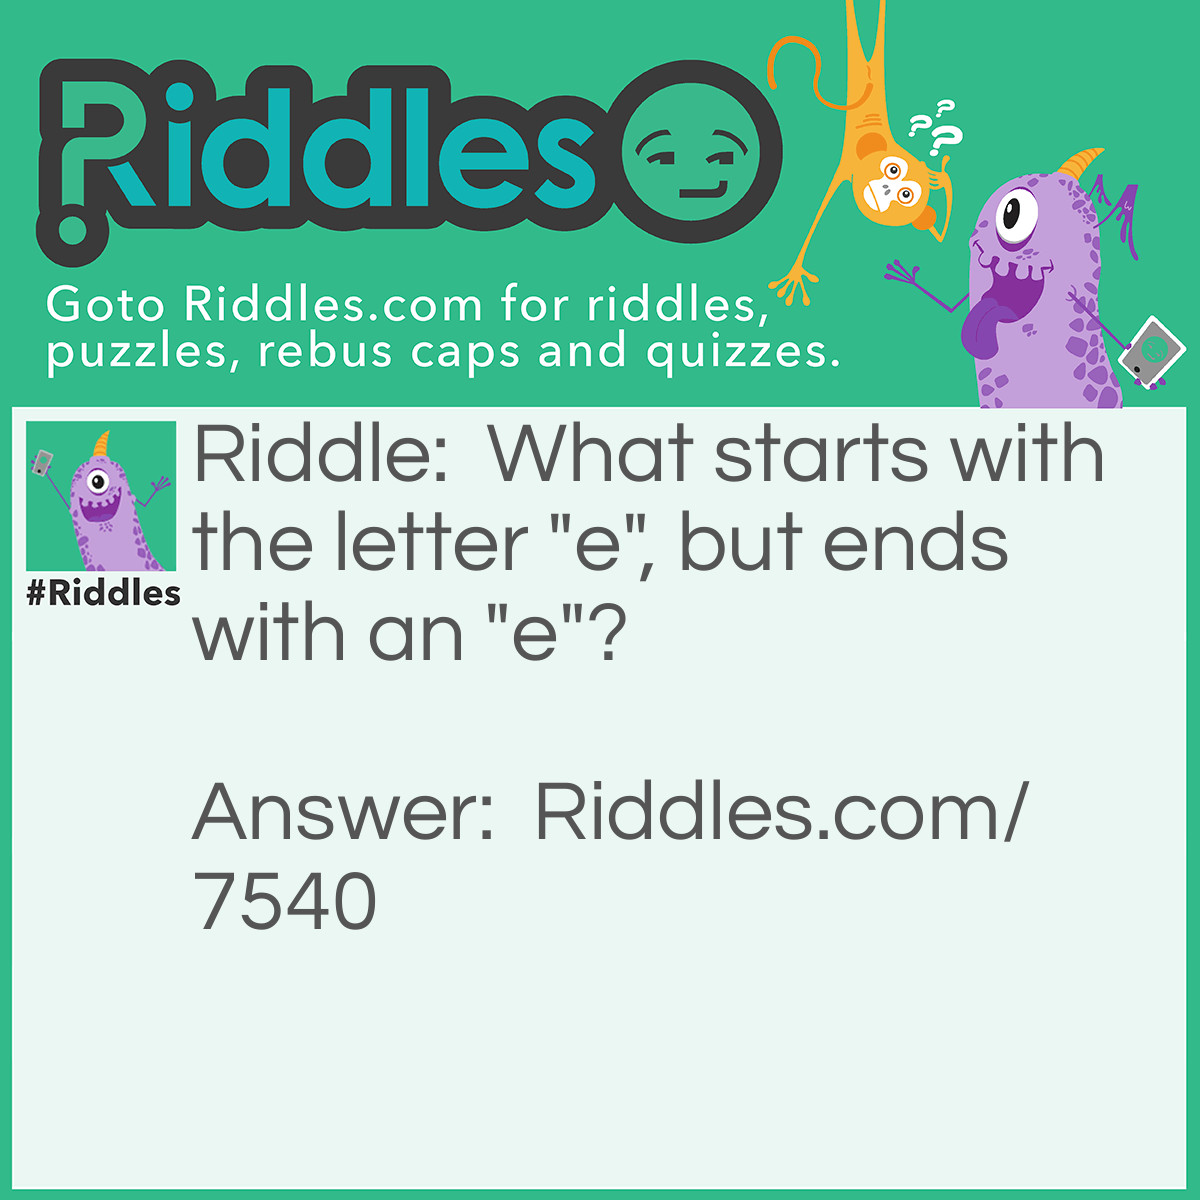 Riddle: What starts with the letter "e", but ends with an "e"? Answer: An envelope.